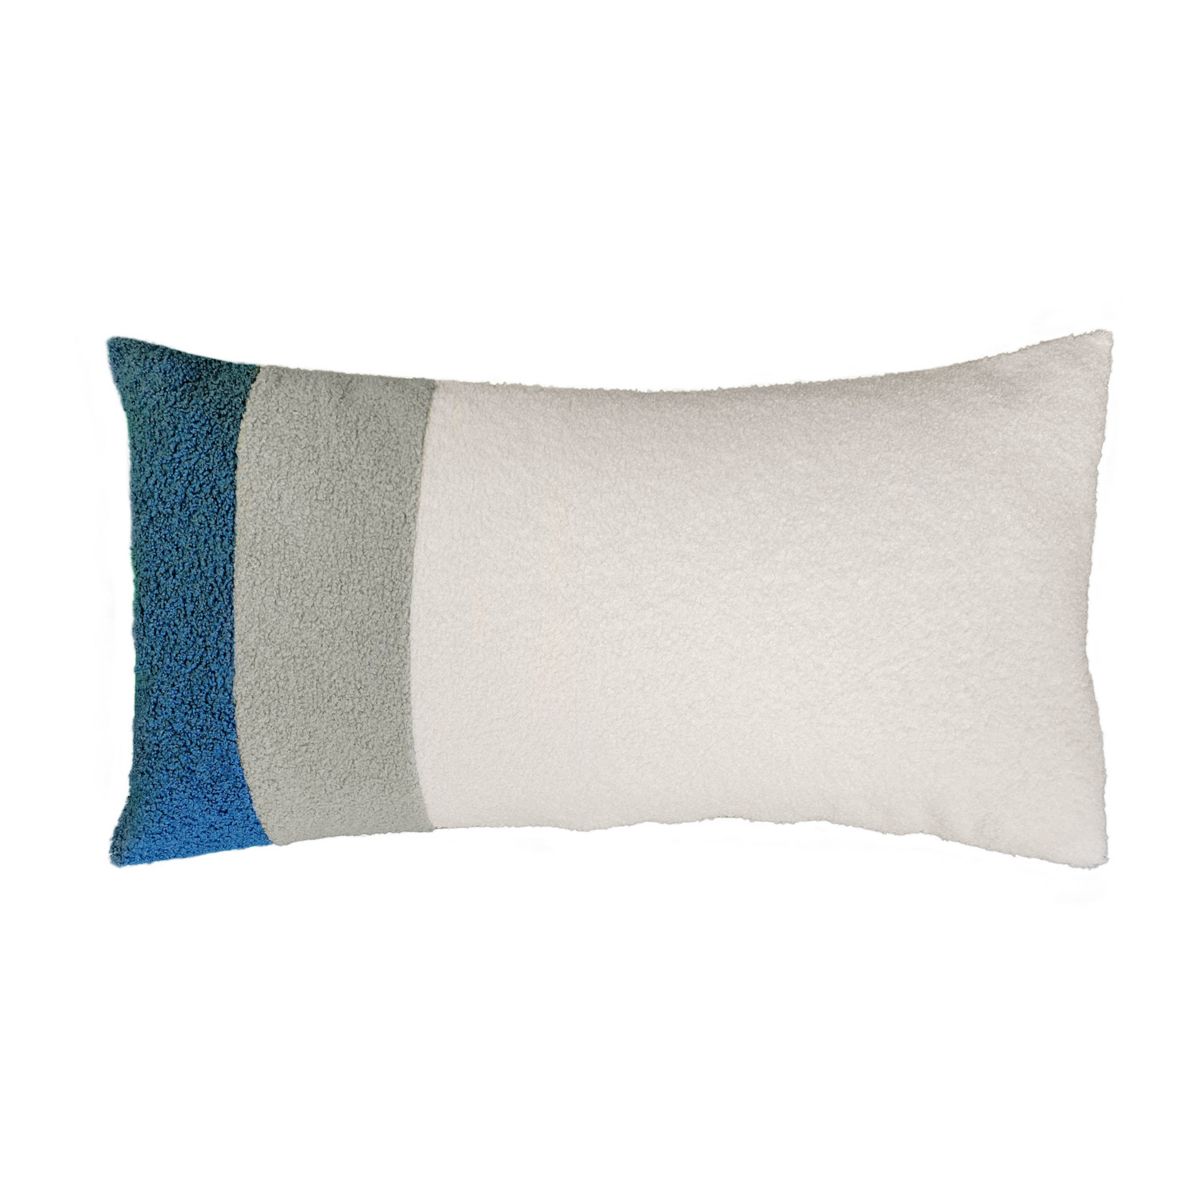 Edie@Home Colorblock Sherpa Racing Stripes Throw Pillow Edie at Home